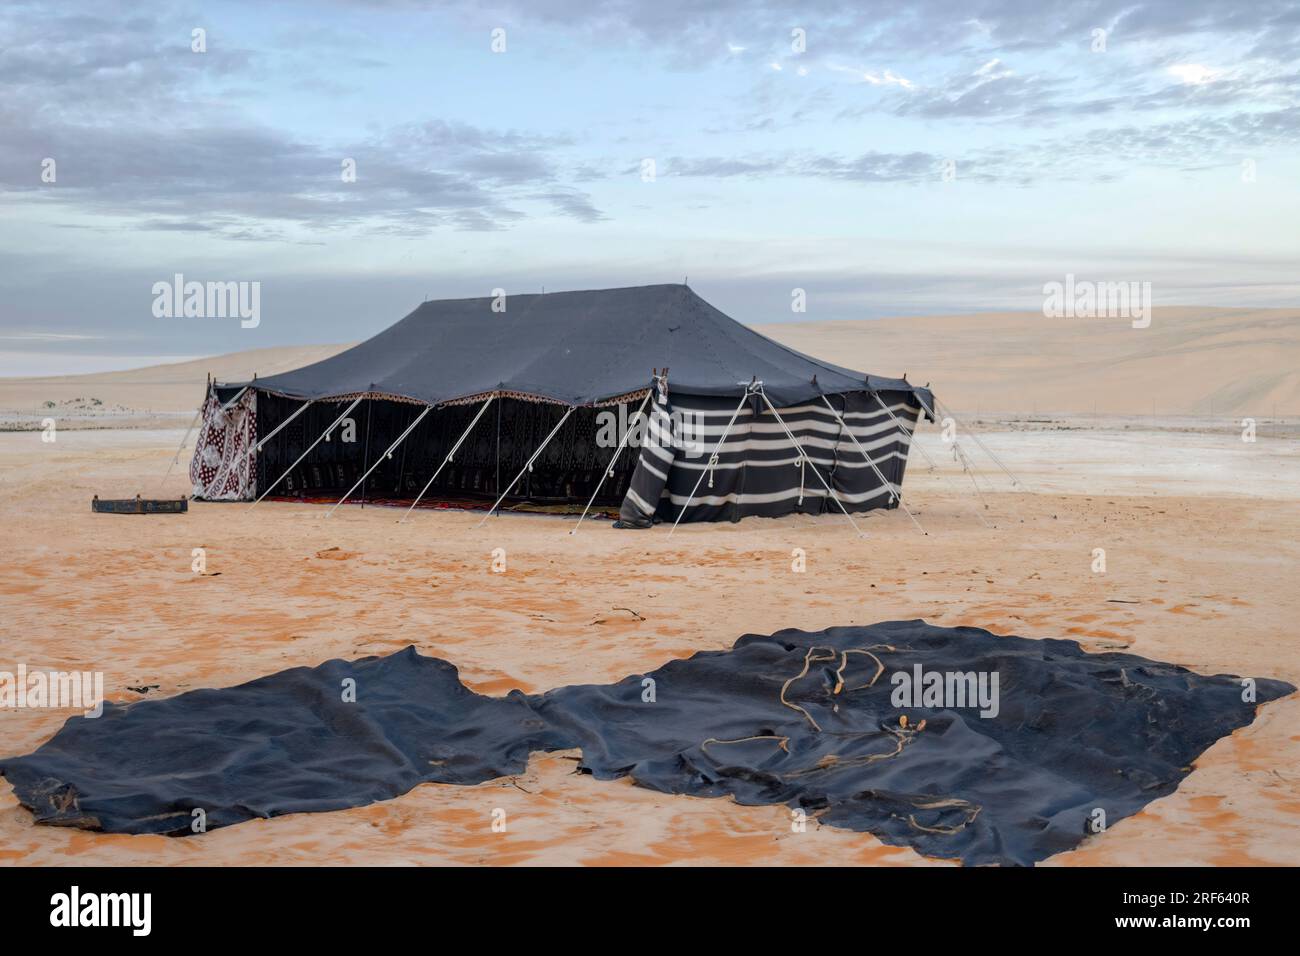 Tent in the desert, south inland sea of Doha, Qatar Stock Photo